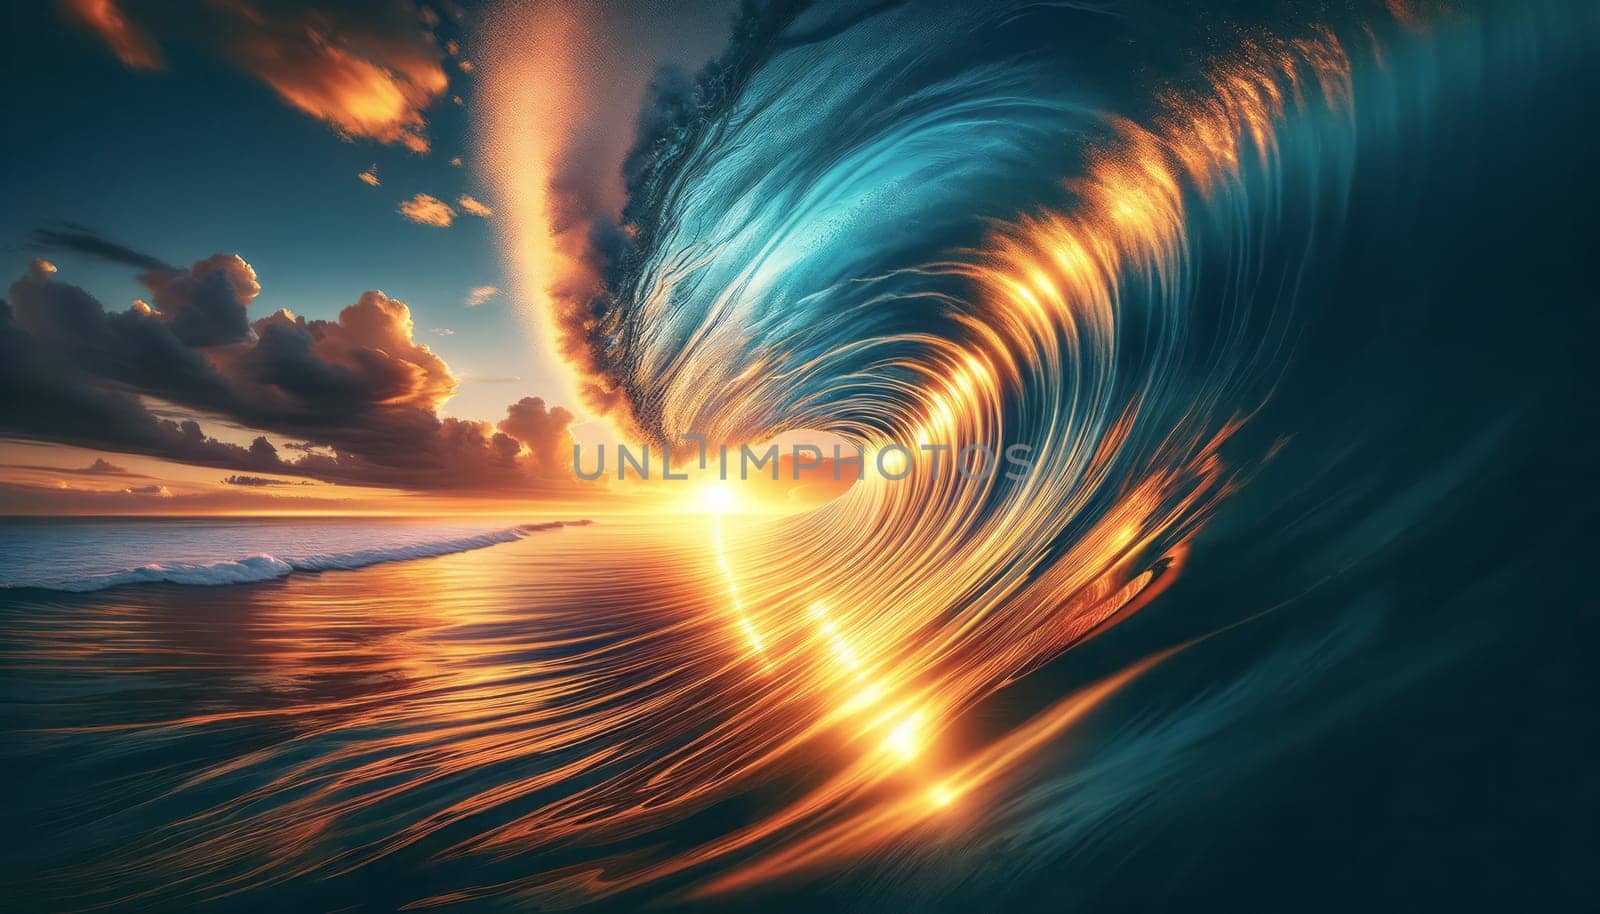 A wide-angle photography capturing a magnificent ocean wave at sunset. The wave is curving and forming a tube, with the sunlight streaming through its crest, creating a luminous effect. The colors are vivid, with the deep blue of the sea contrasting with the fiery oranges and yellows of the sunset sky. The sun is low on the horizon, partially obscured by the wave, and its reflection on the water's surface adds a golden path leading to the horizon. Clouds are visible in the sky, dyed in shades of orange by the setting sun, contributing to the dramatic and beautiful seascape.